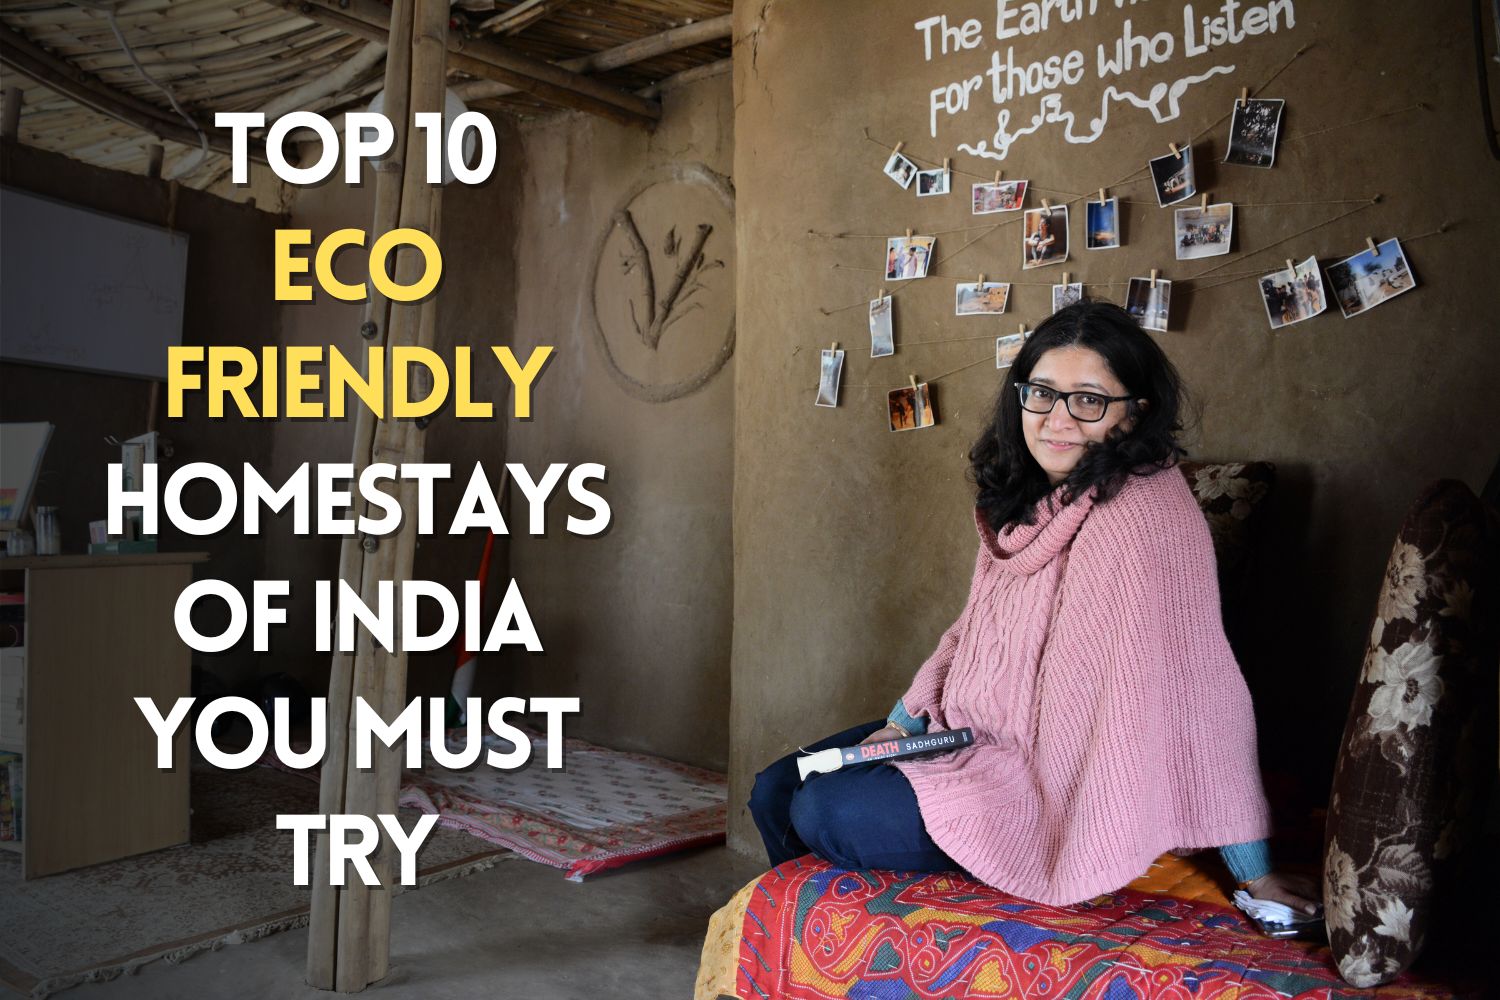 Top 10 Eco Friendly Homestays of India You Must Try